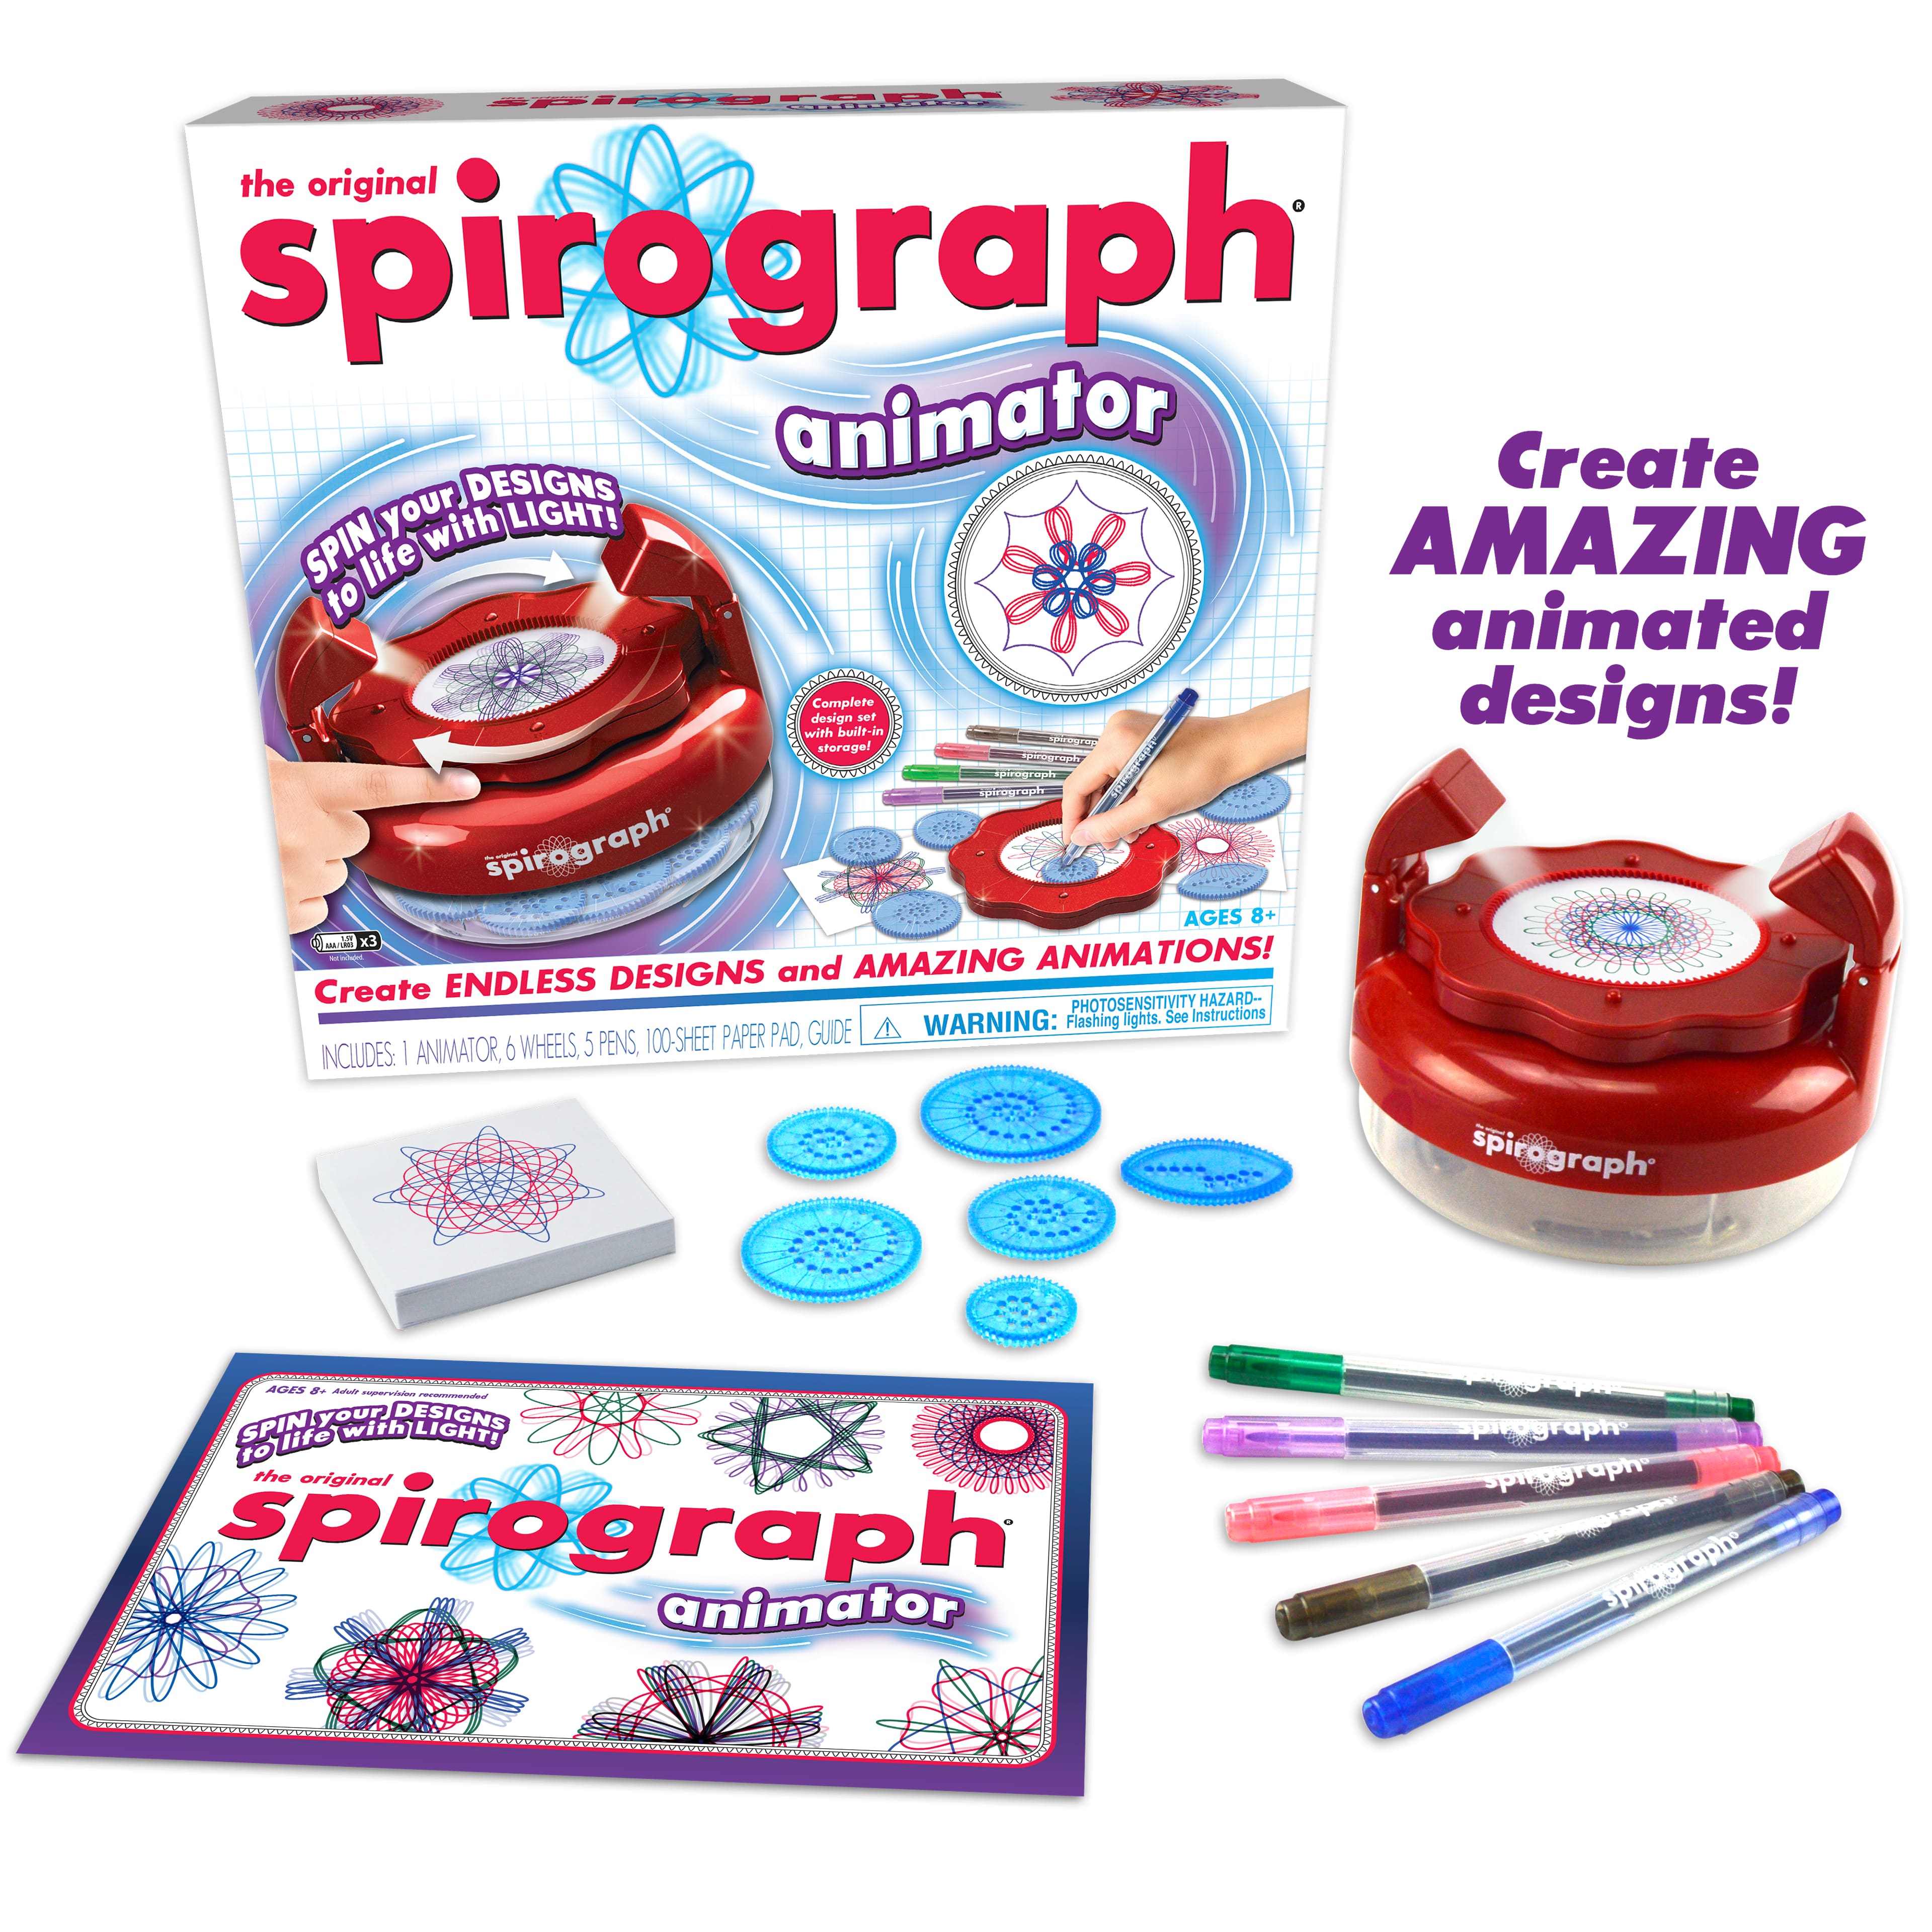 Spirograph Animator -- Create Amazing 3D Designs with Lights and Spinning Action - image 2 of 10